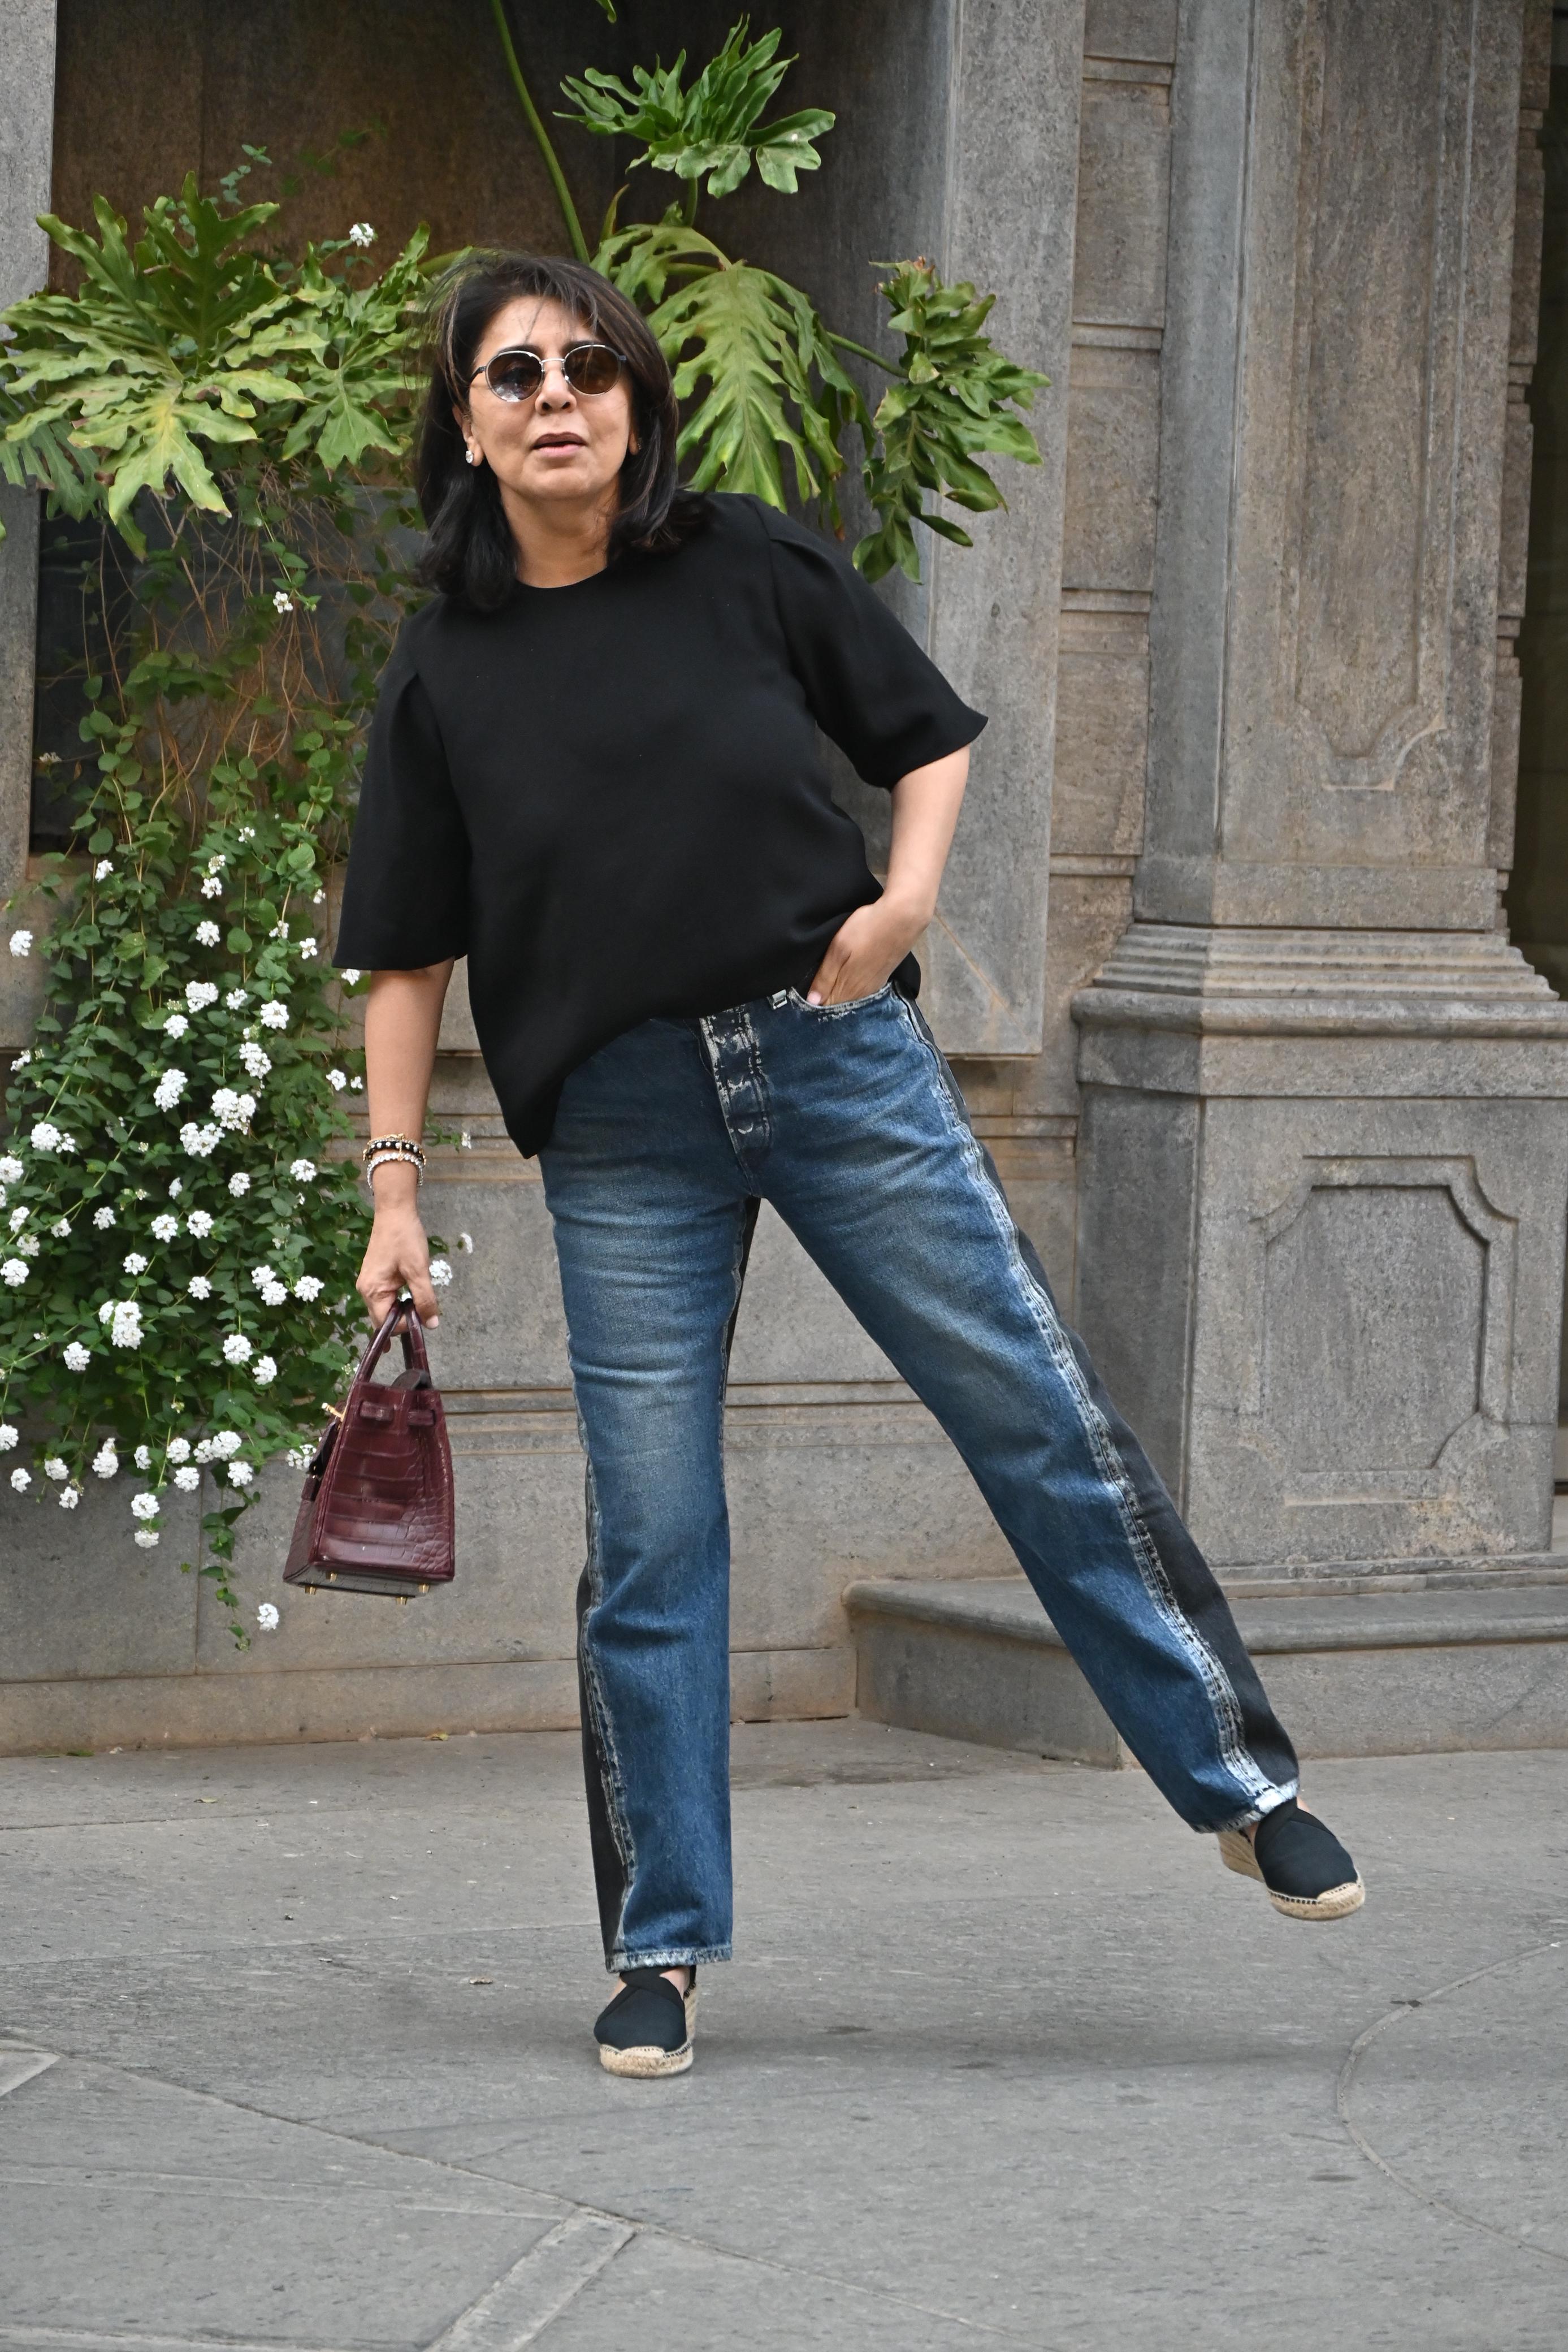 Neetu Kapoor was spotted in Bandra today. She looked vibrant as she got clicked by the paparazzi